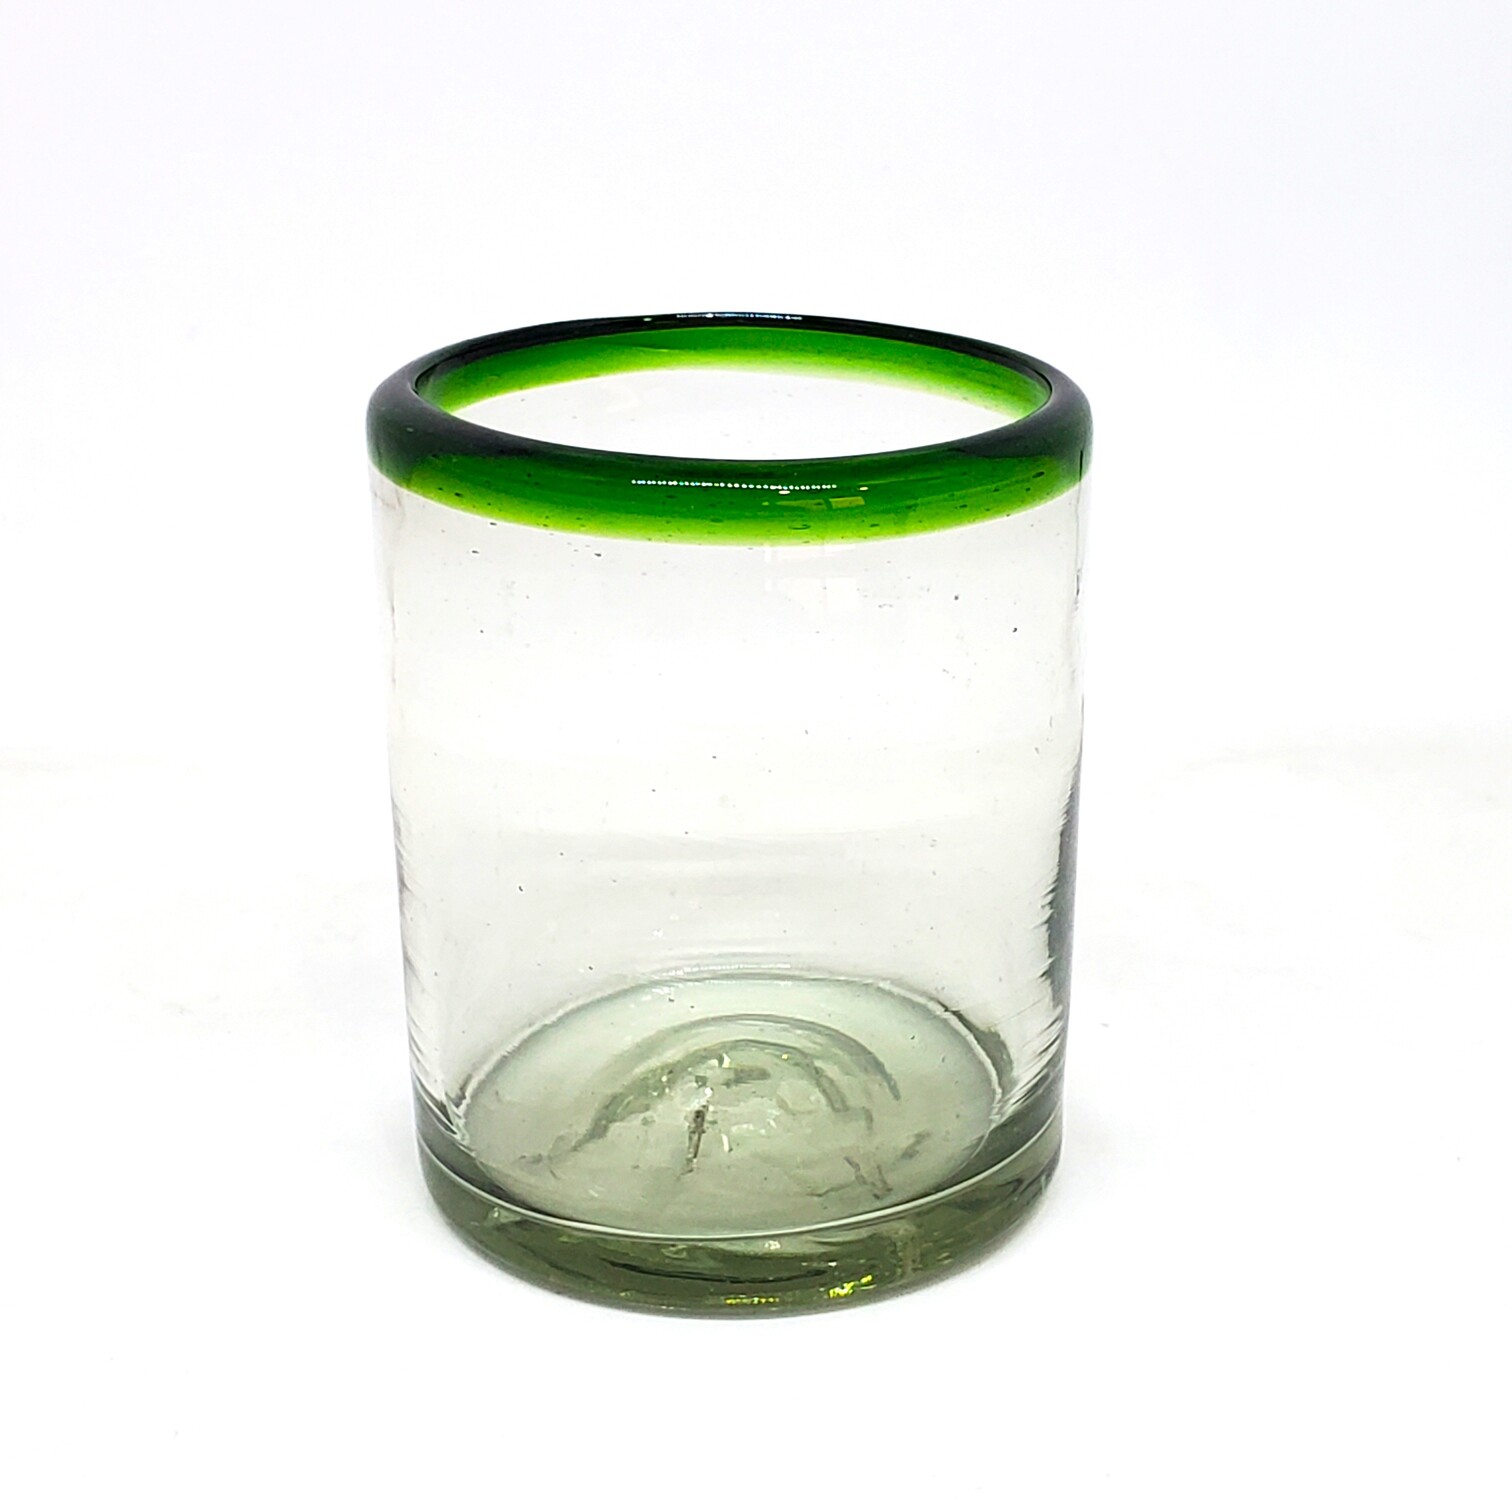 Sale Items / Emerald Green Rim 10 oz Tumblers  / This festive set of tumblers is great for a glass of milk with cookies or a lemonade on a hot summer day.